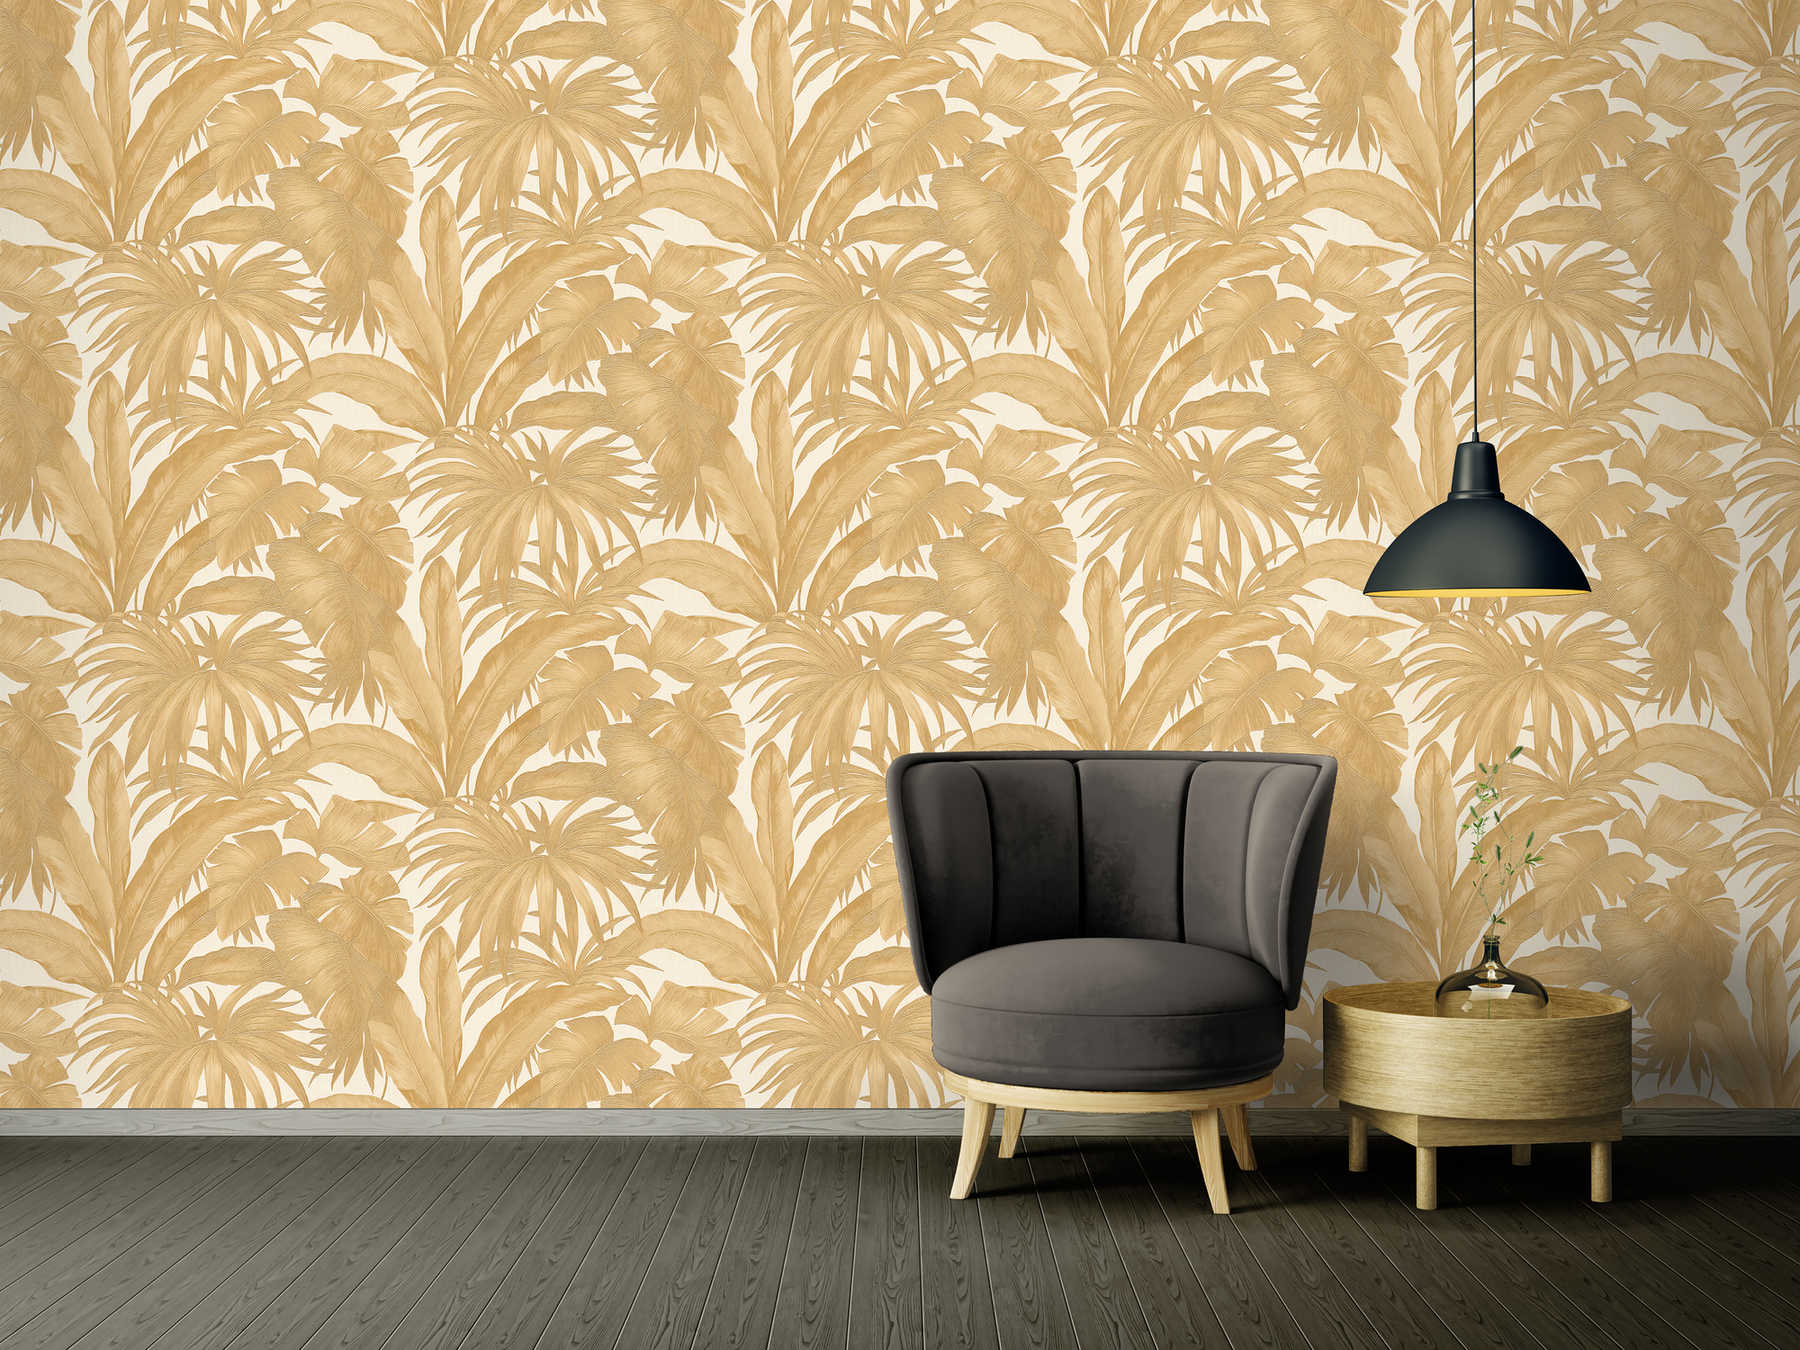             VERSACE wallpaper with palm trees & gold effect - cream, metallic
        